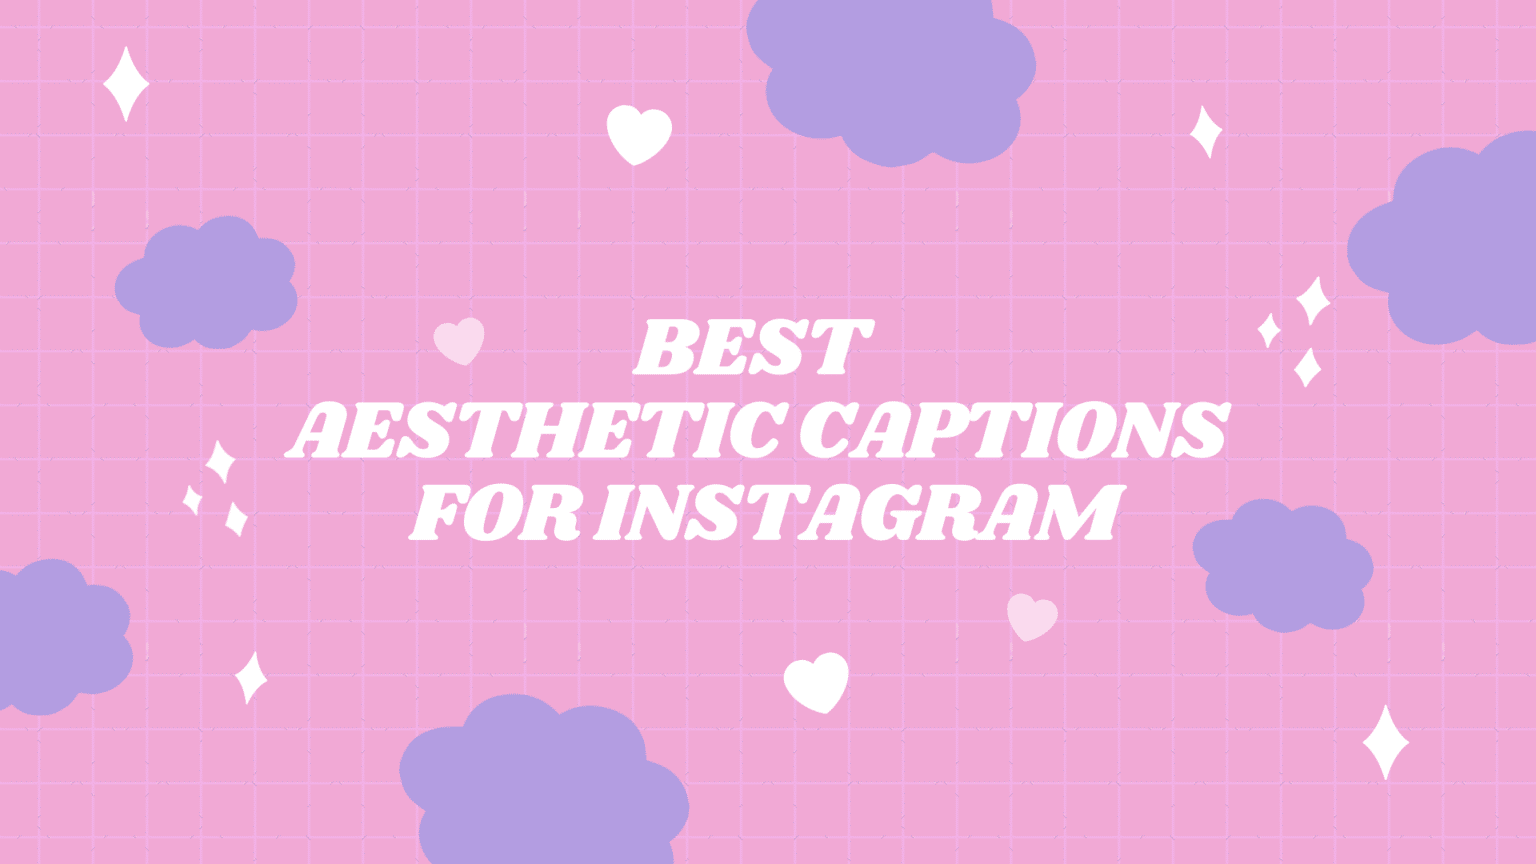 Best Picked Captions & Quotes For your Family and Friends - Instagram